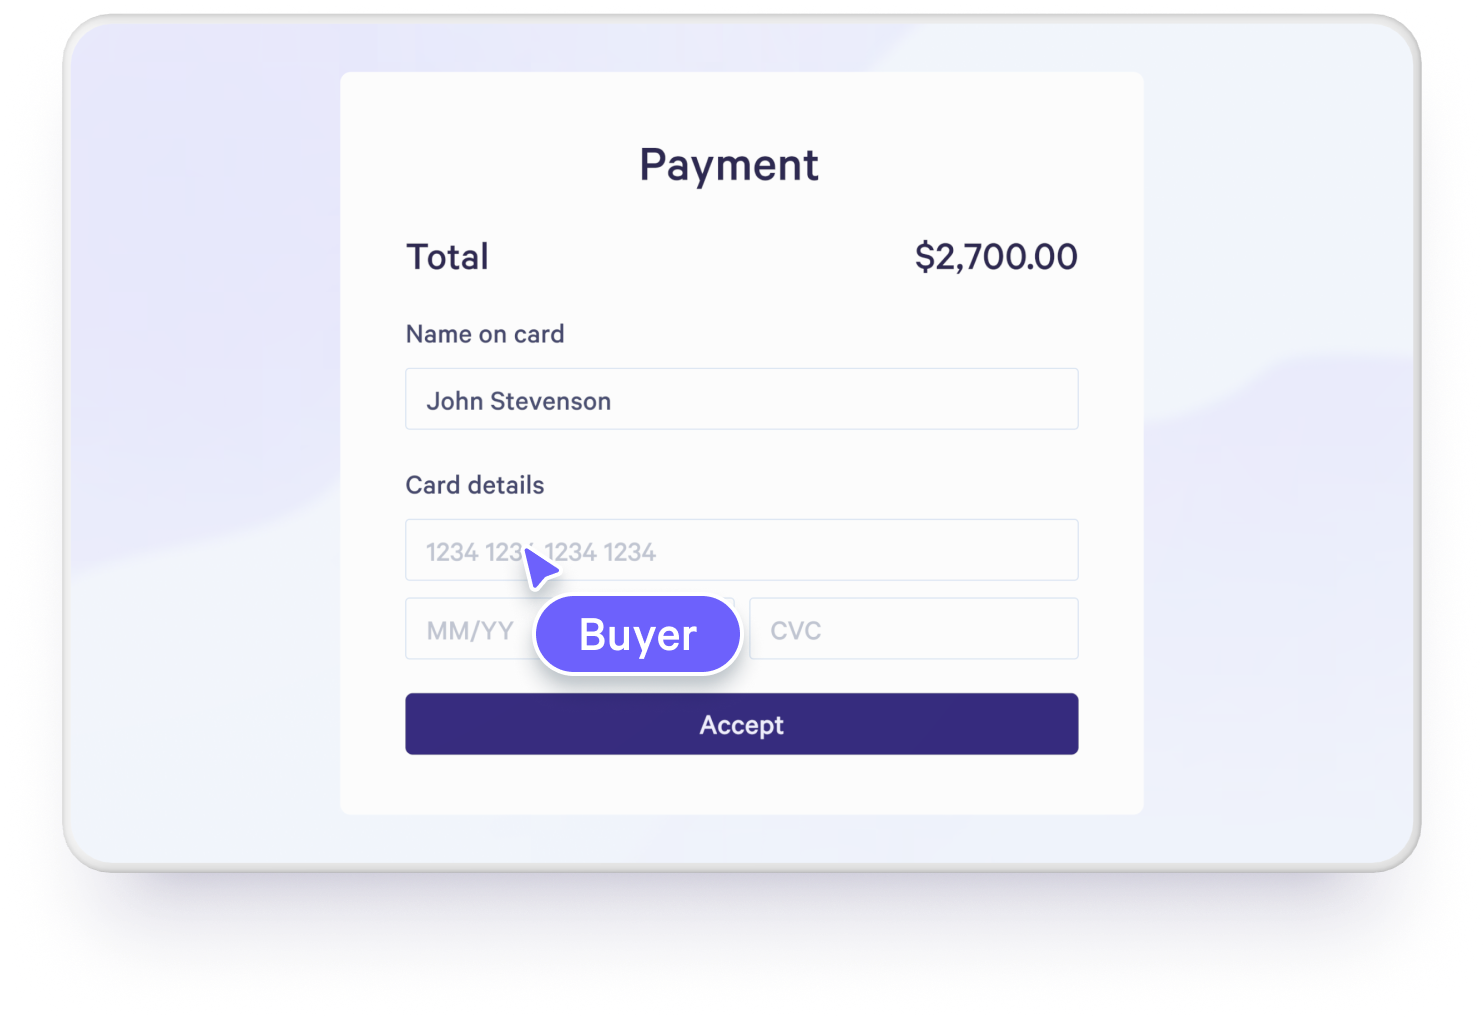 Get paid instantly with our Stripe integration